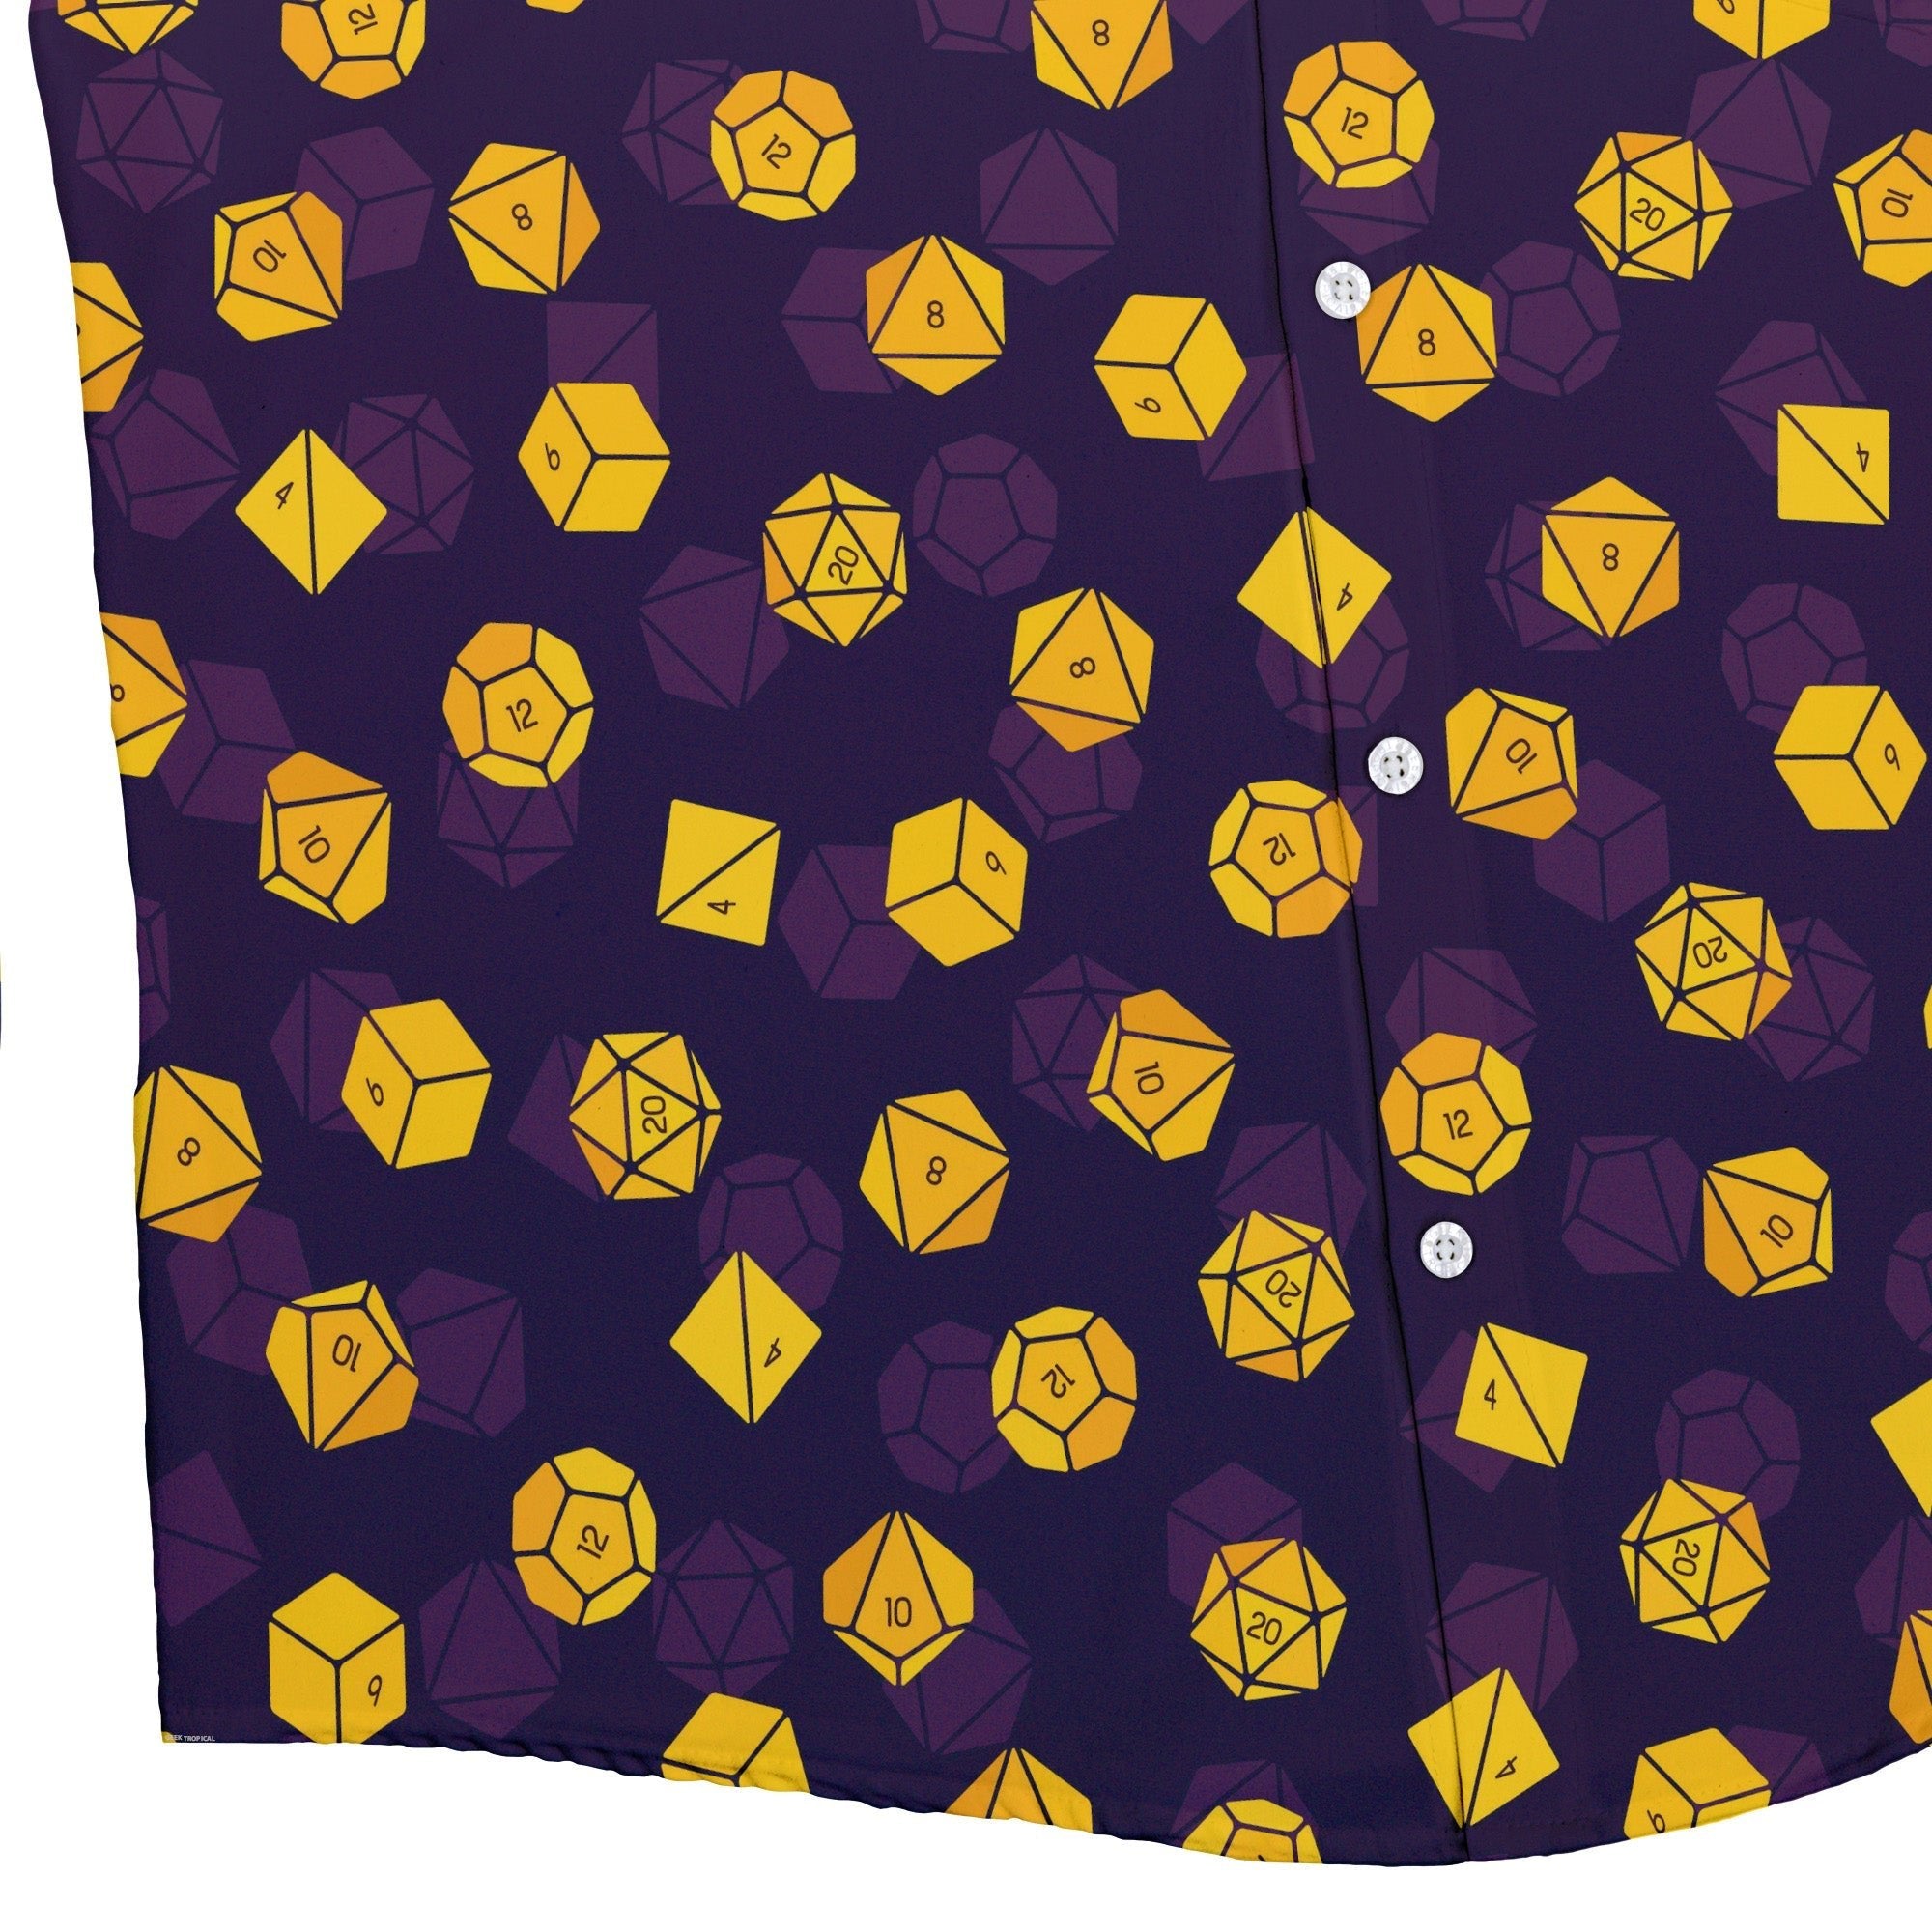 Dnd High Roller Gold Dice Button Up Shirt - adult sizing - dnd & rpg print - Simple Patterns